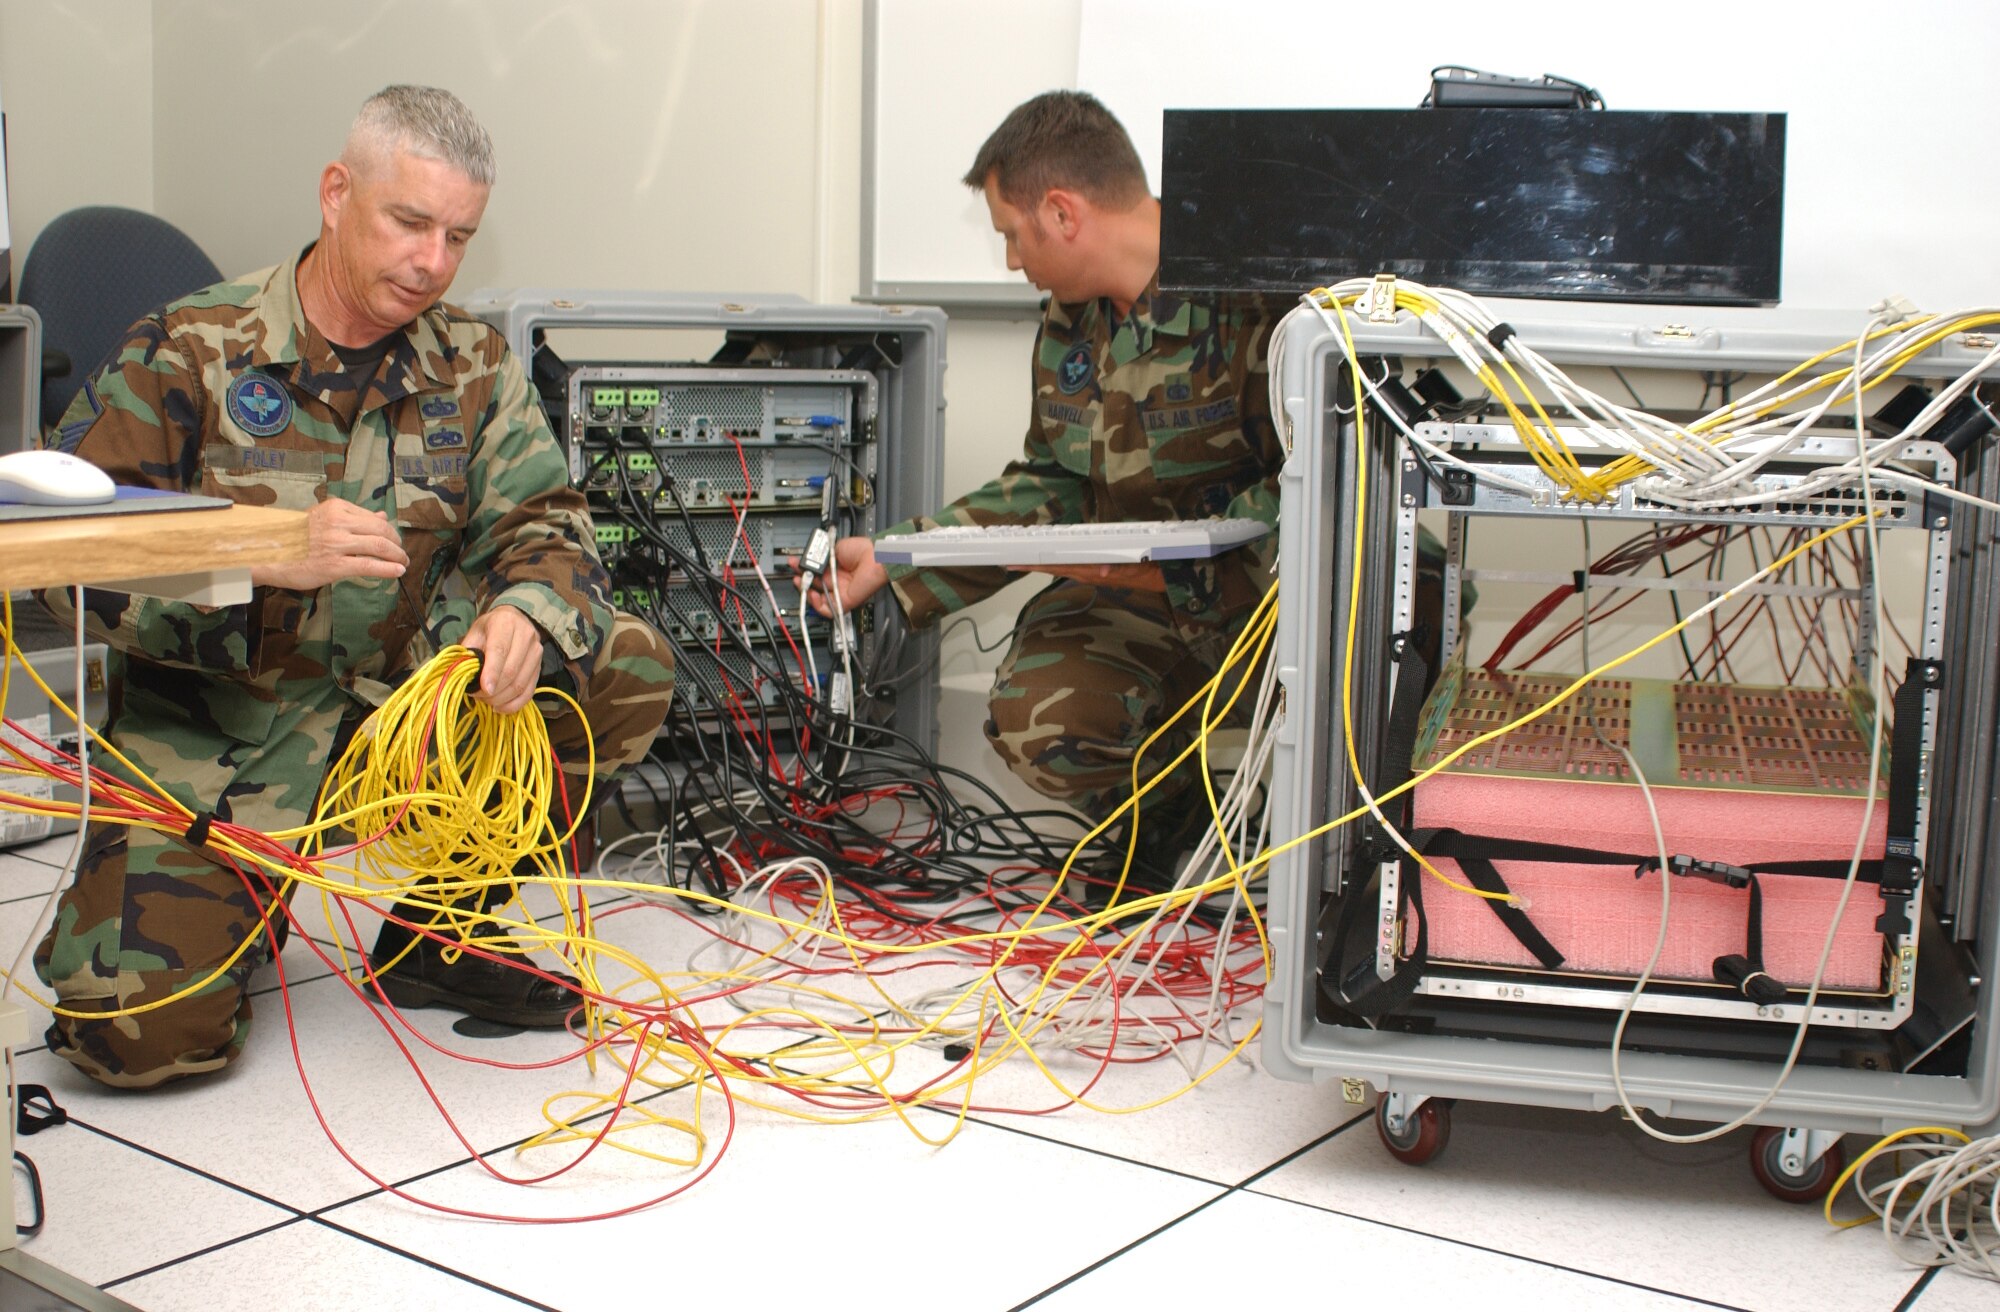 Master Sgt. Steve Foley, left, and Staff Sgt. Mike Harvell, 333rd Training Squadron mobile training team members, reconfigure and prepare mobile training kits to return to the field. (U.S. Air Force photo by Kemberly Groue)